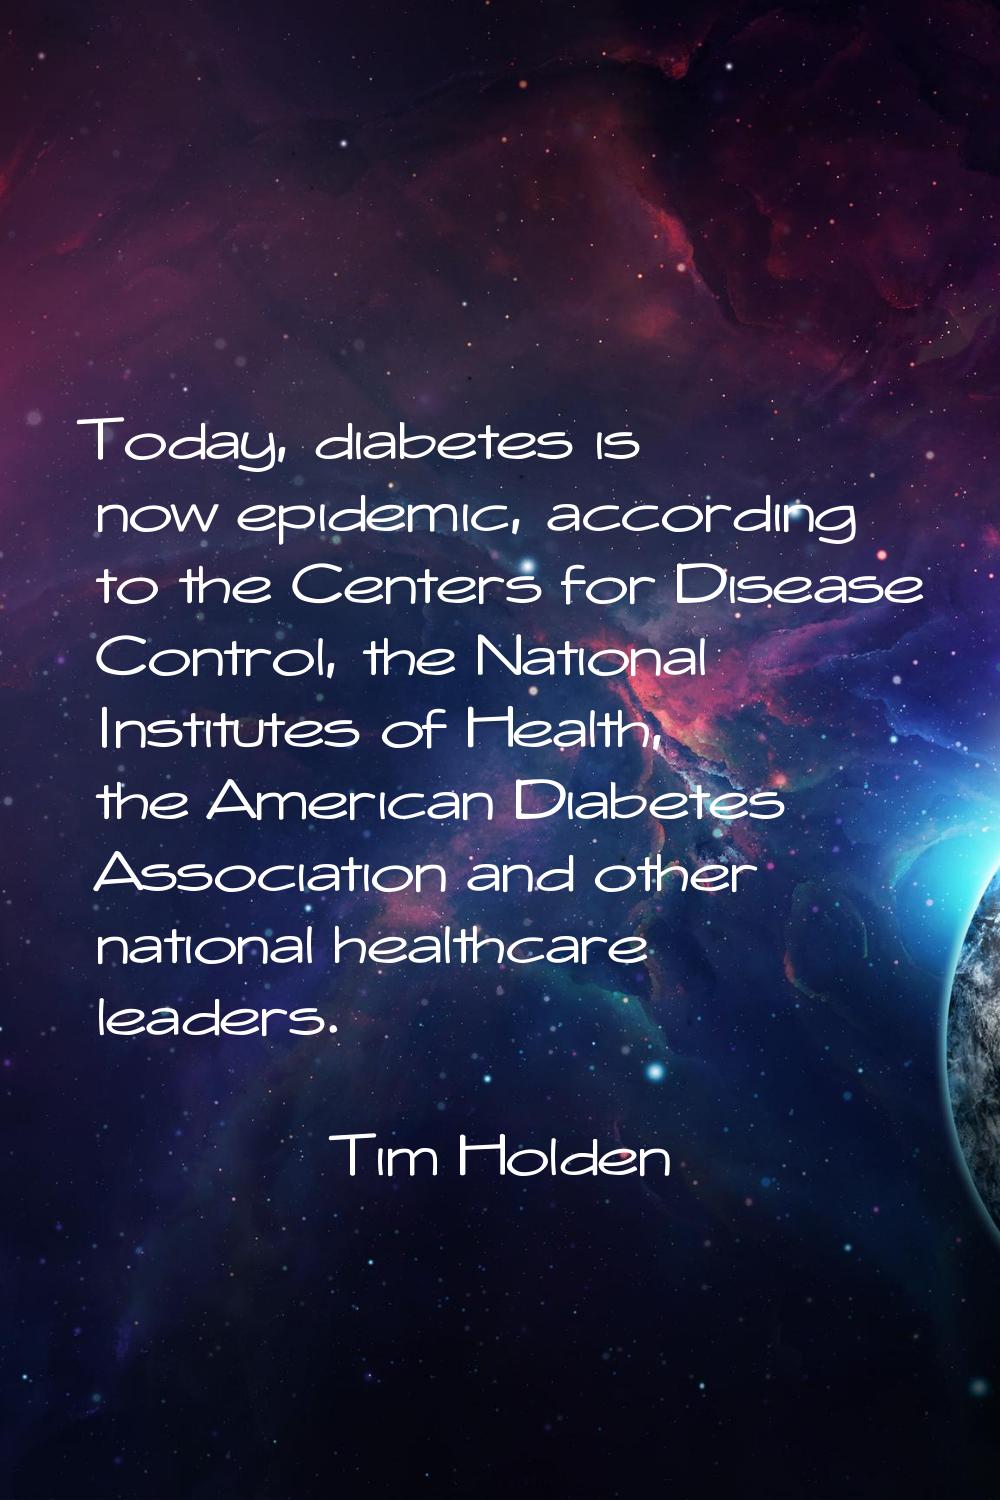 Today, diabetes is now epidemic, according to the Centers for Disease Control, the National Institu